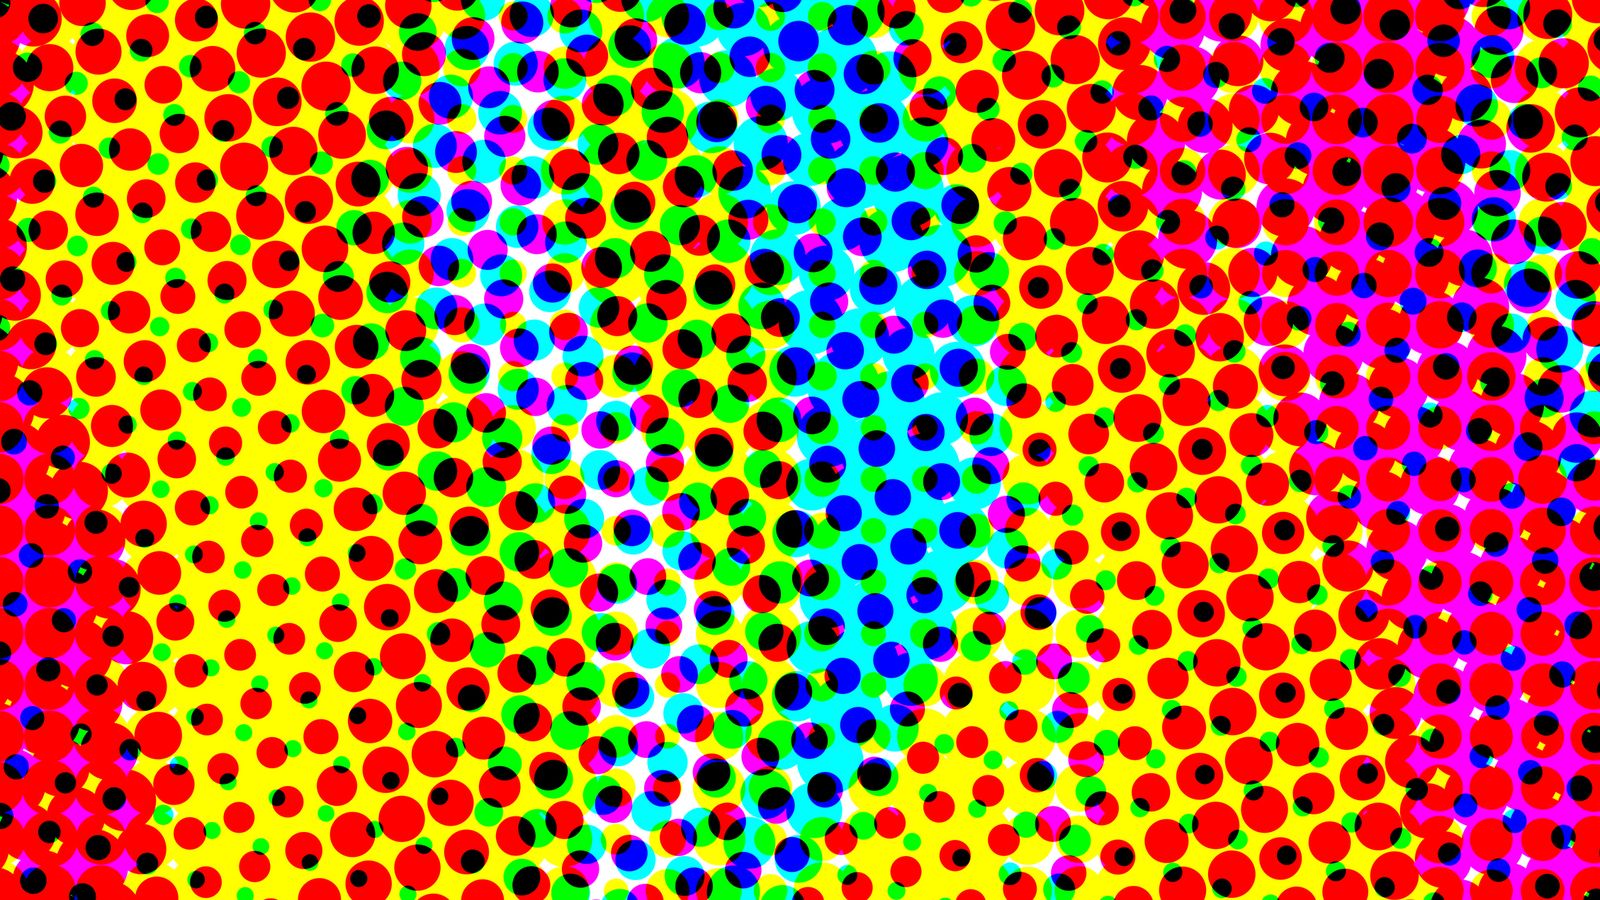 psychedelic-mesh-dots-royalty-free-image-1621520115.